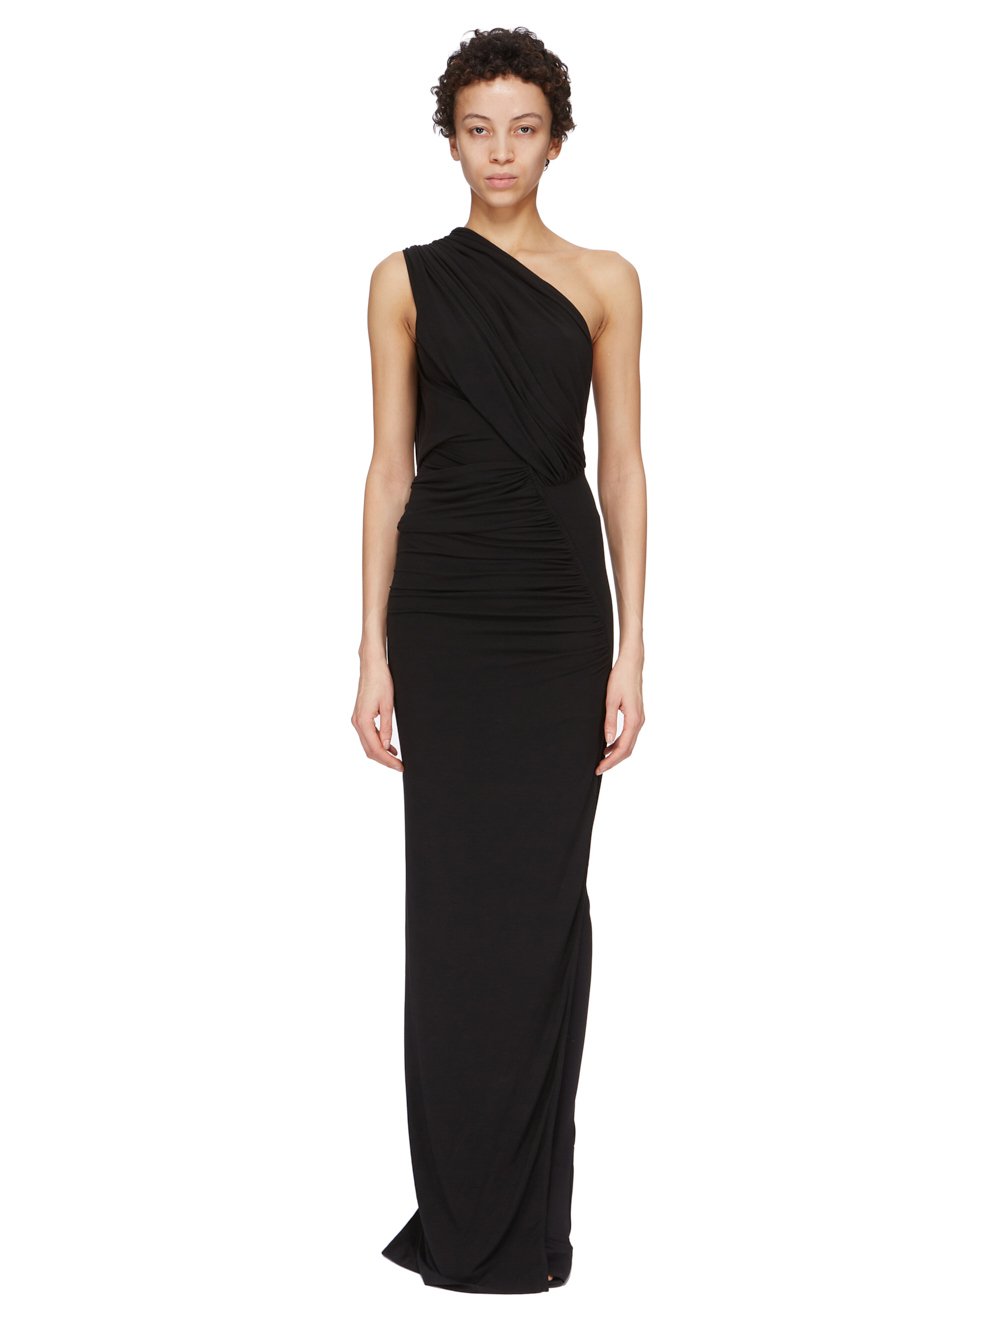 RICK OWENS FW23 LUXOR HERA GOWN IN BLACK MODAL CASHMERE JERSEY